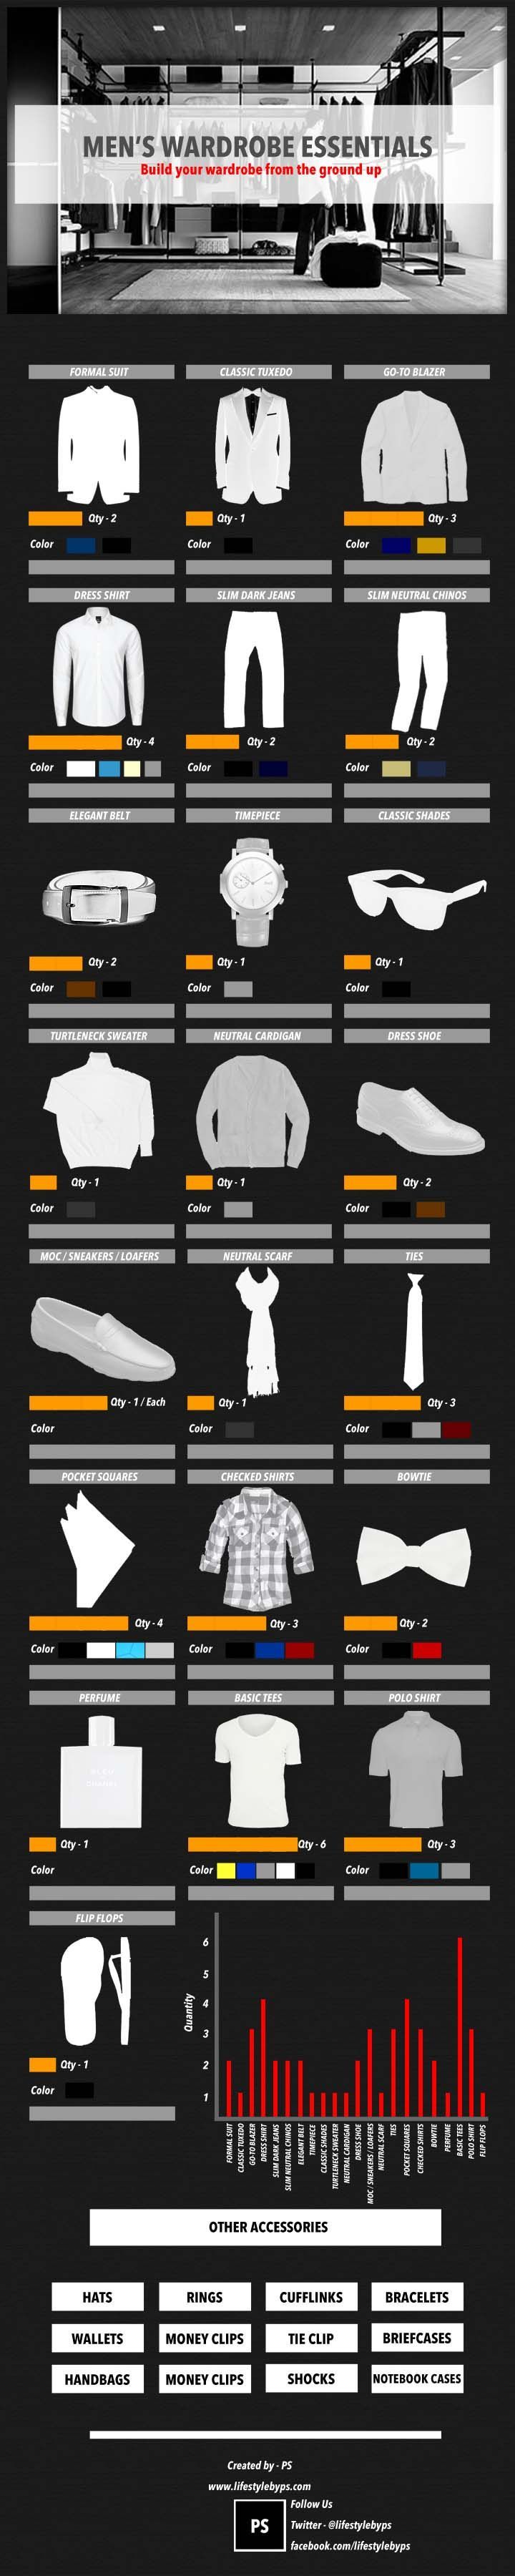 Build Your Wardrobe from the Ground Up (infographic) | The Roosevelts